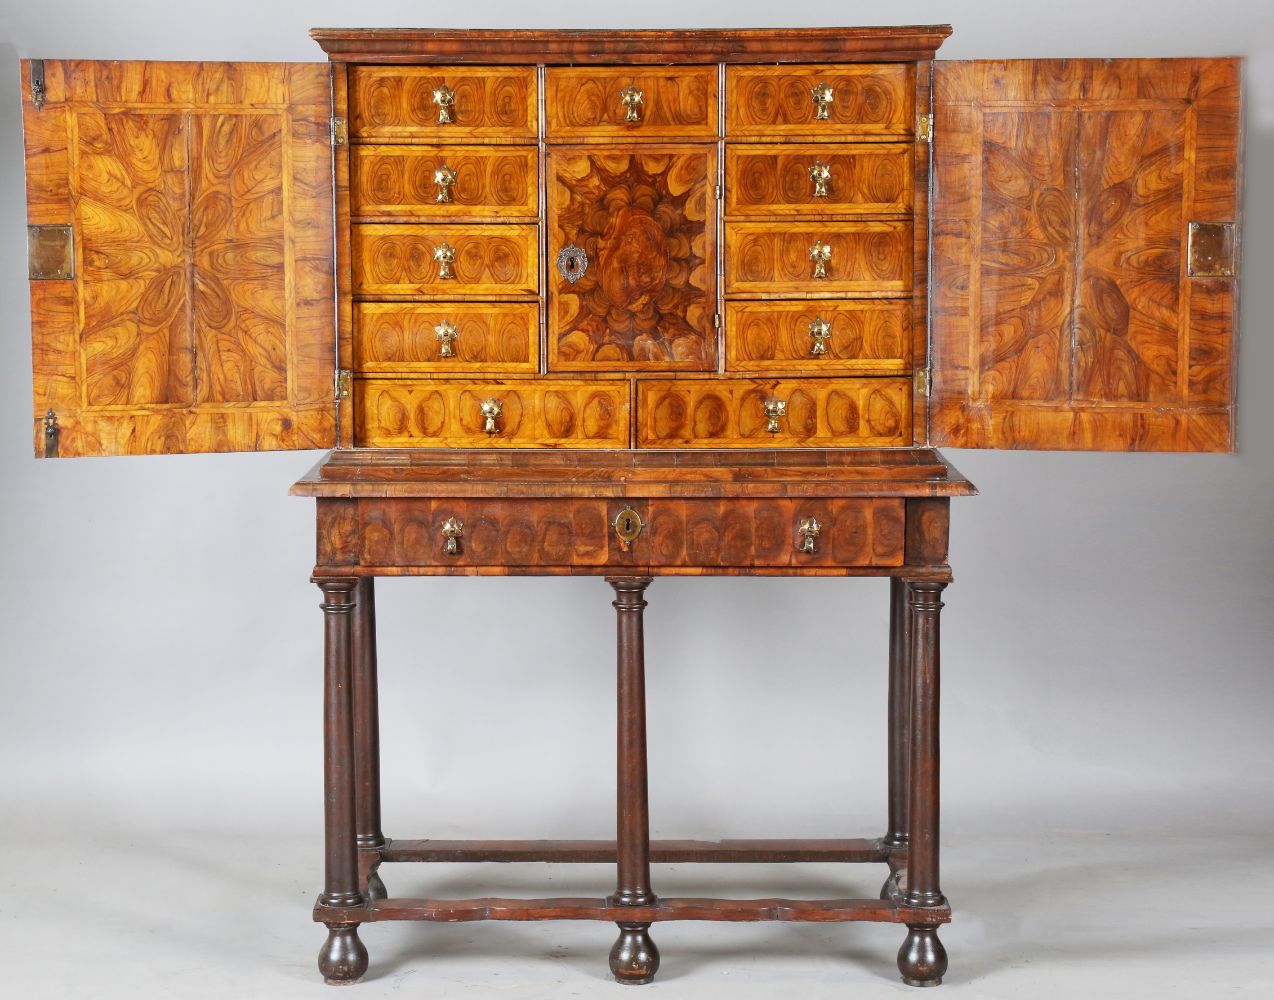 Furniture. Collectors' Items, Works of Art & Light Fittings. Needleworks, Textiles & Clothing. Rugs & Carpets.